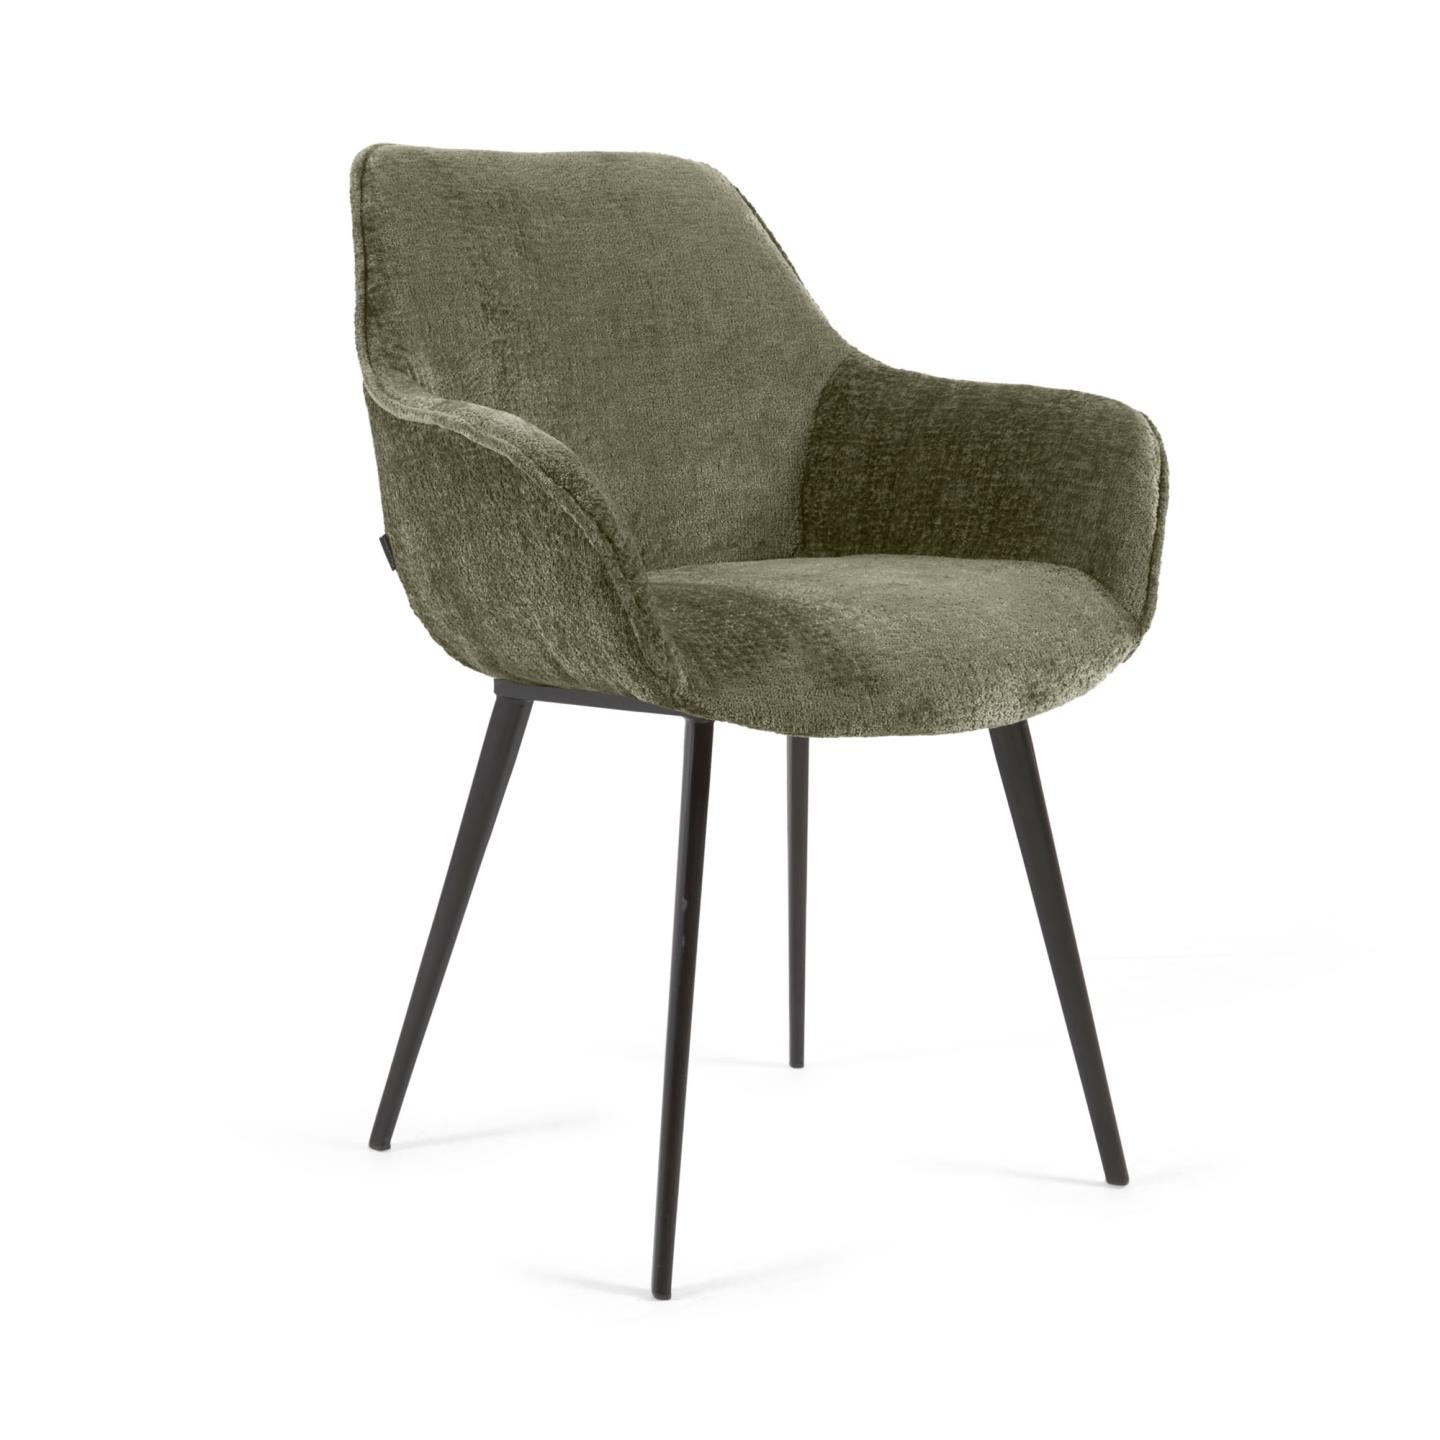 Amira chair in dark green chenille with steel legs with black finish